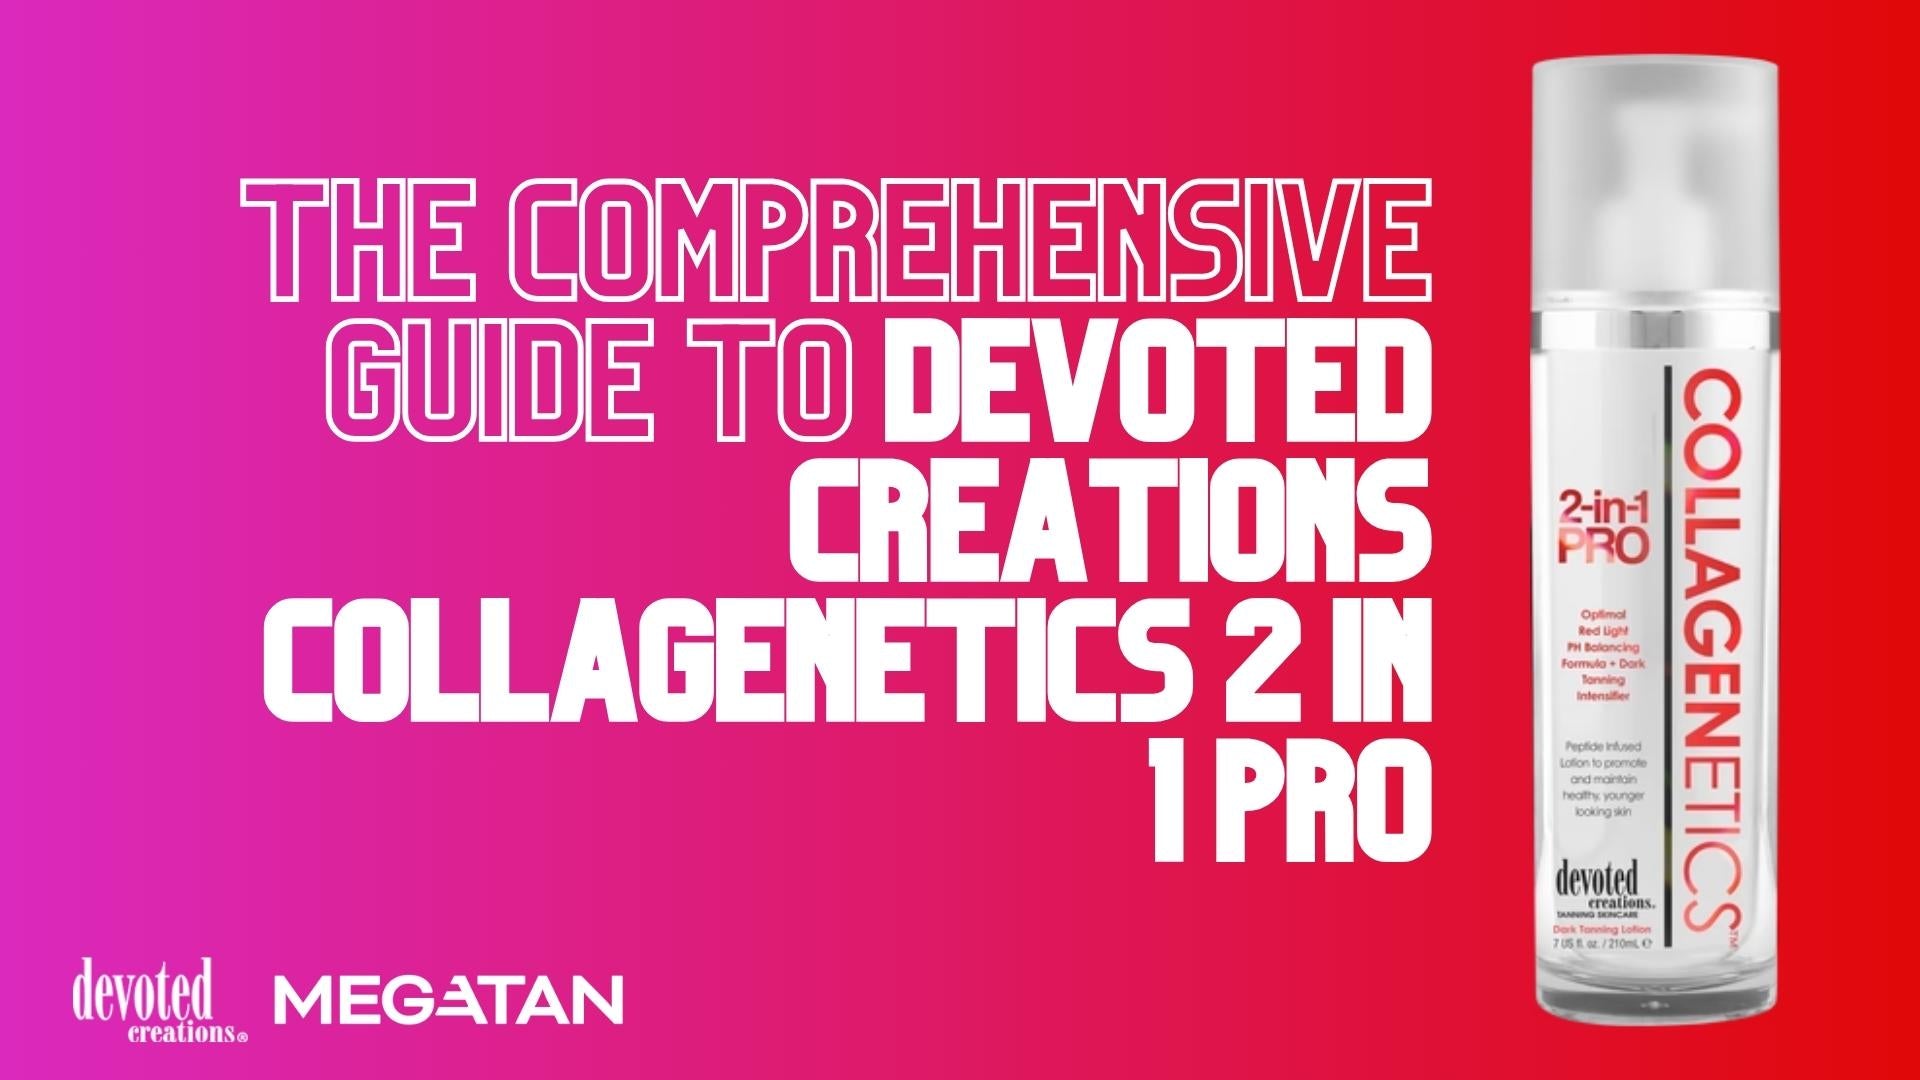 Devoted Creations Collagenetics 2 in 1 Pro: A Comprehensive Review and Guide